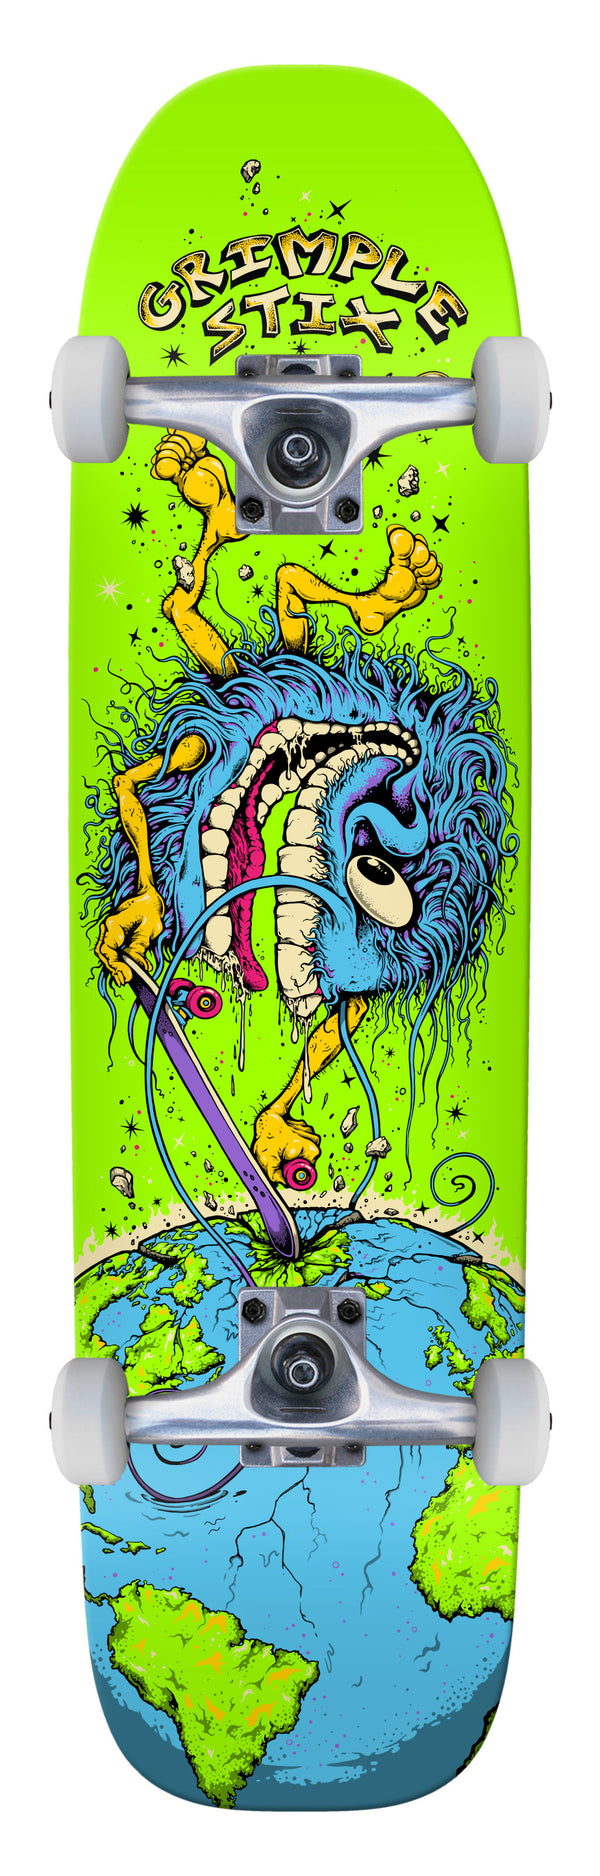 An ANTIHERO GRIMPLE STIX SPACEWALKER COMPLETE skateboard with an image of a monster, inspired by Grimple Stix.